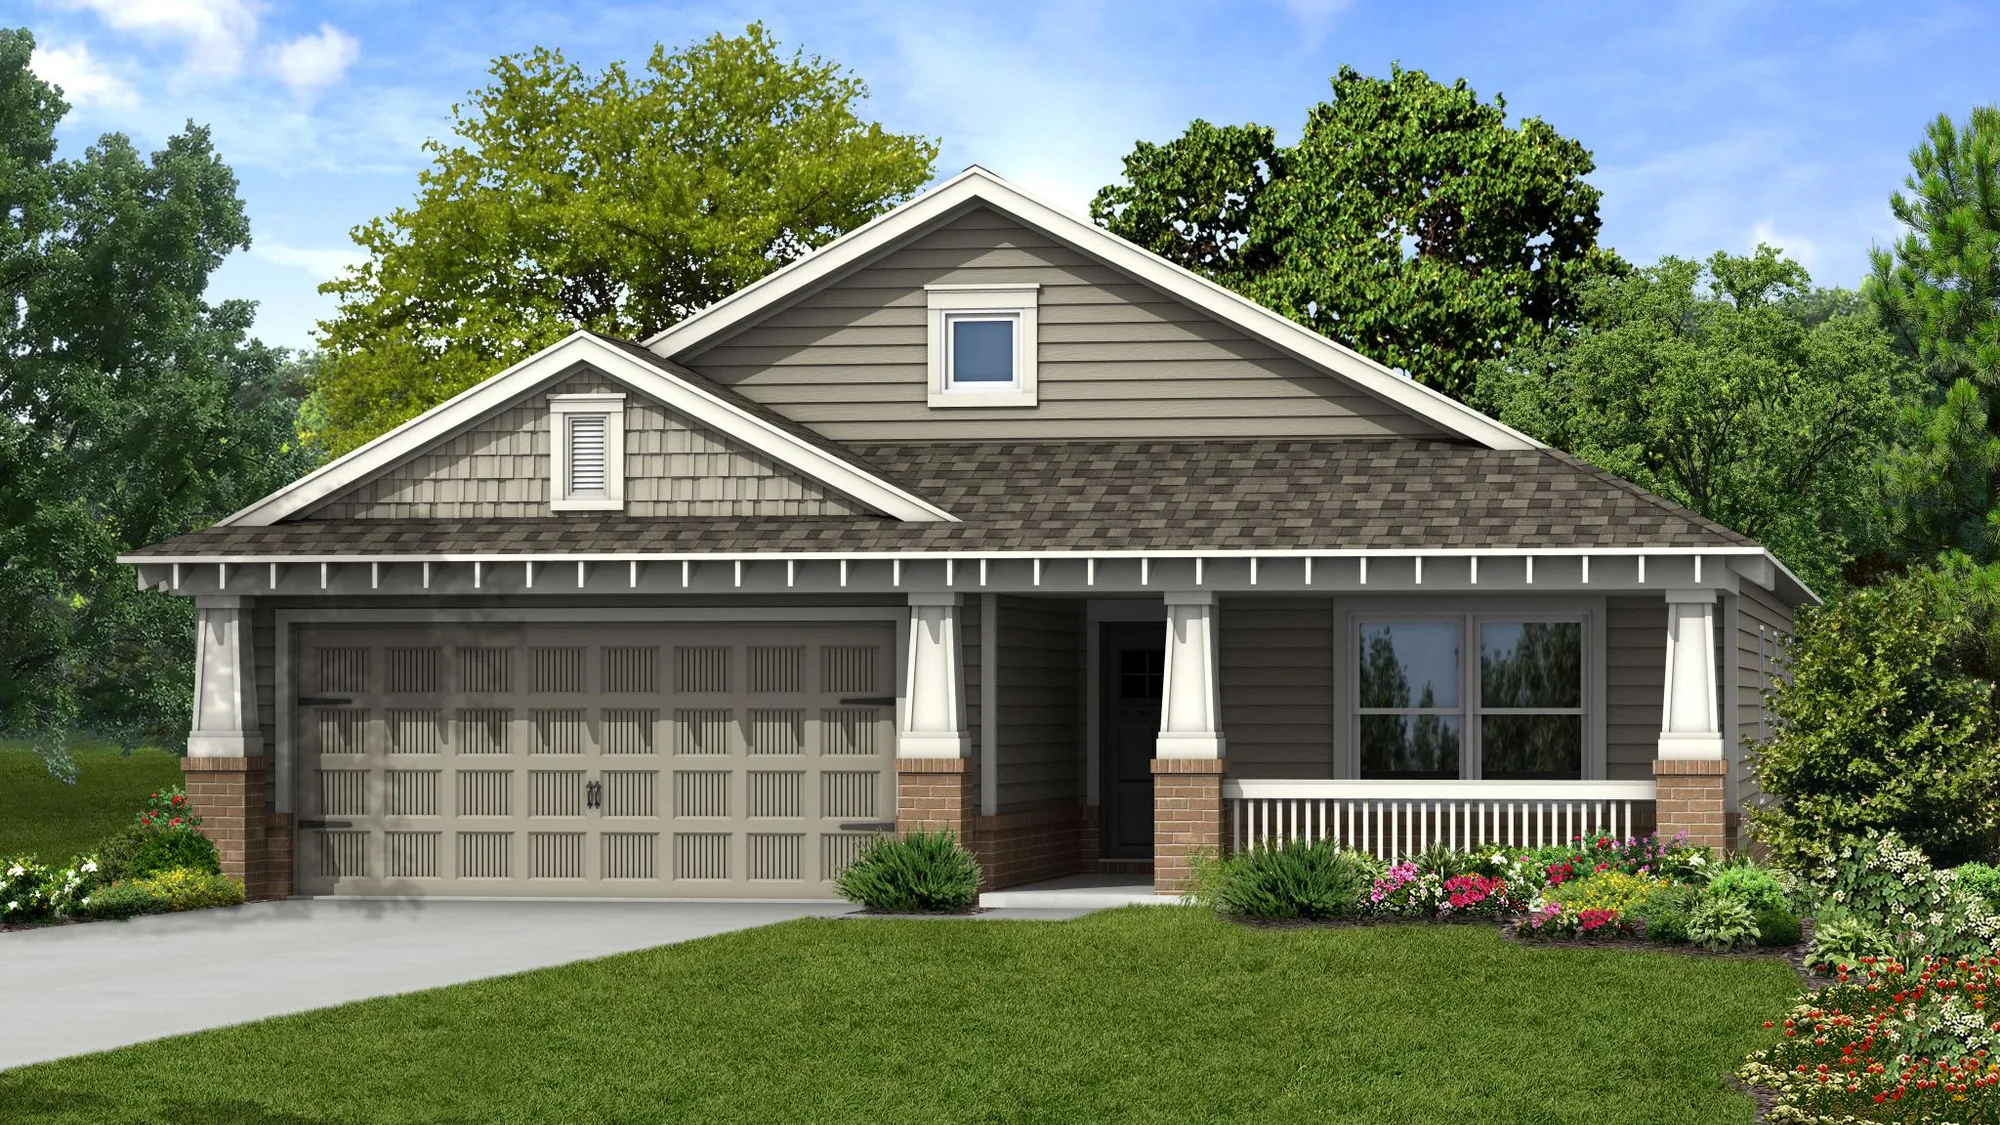 Custom two story House or home plan 1,818 sq ft. 